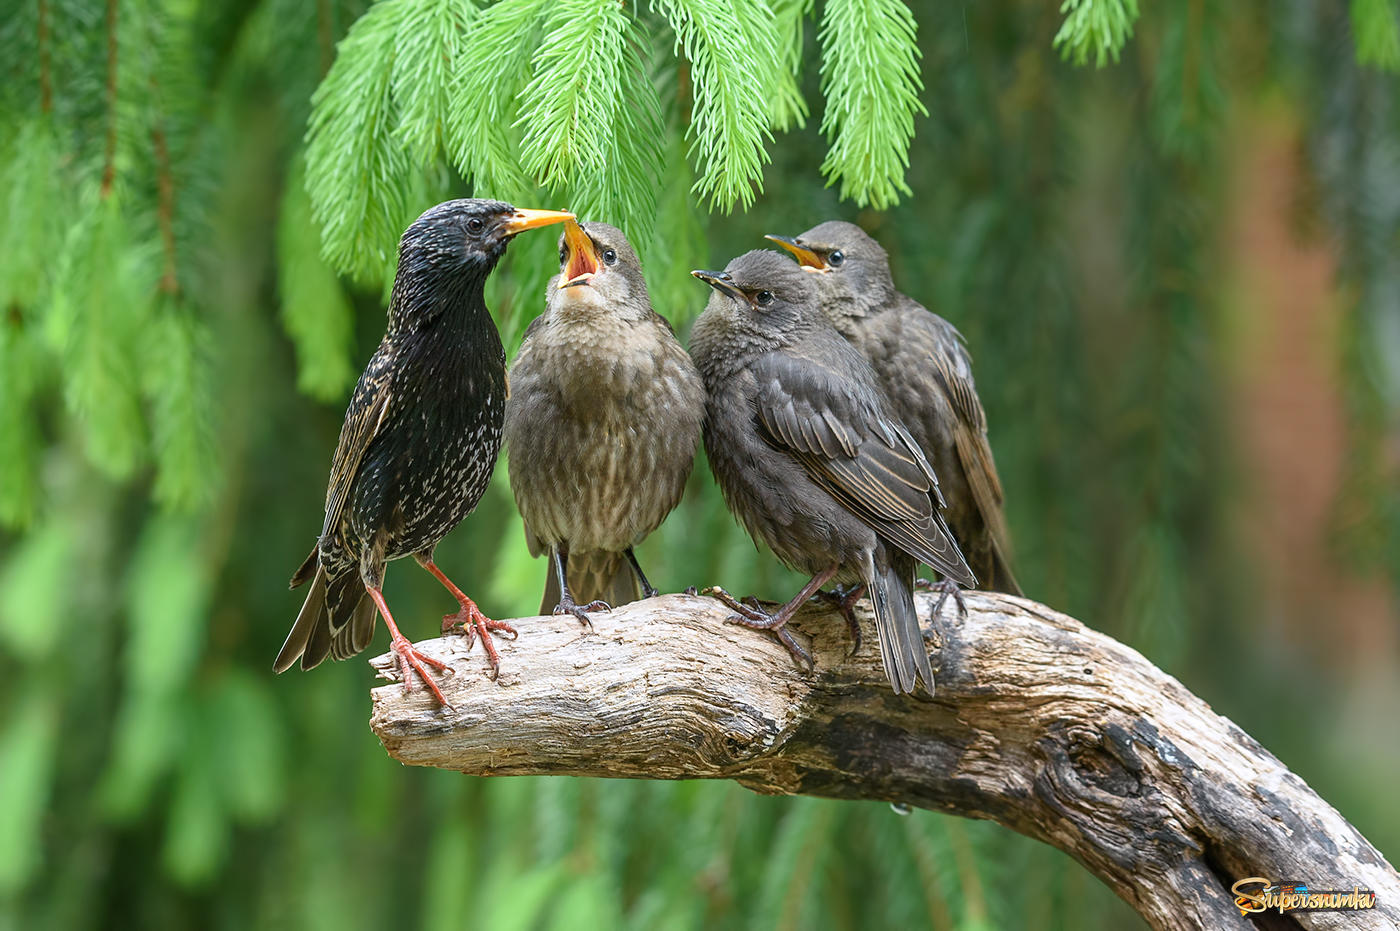 Starling family 